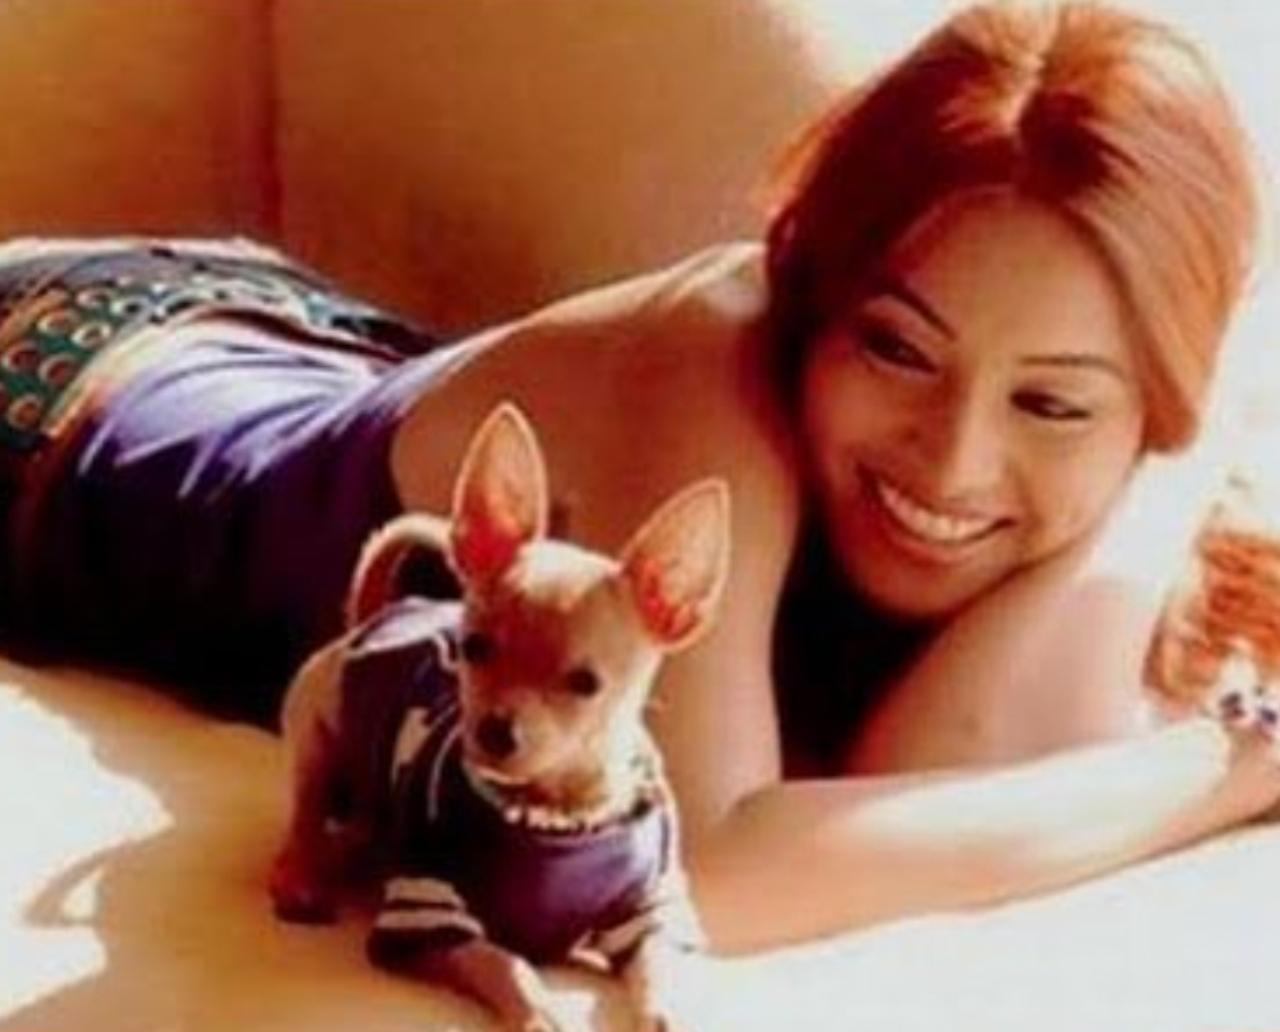 Bipasha Basu and her husband, Karan Singh Grover, lost their pet dog, Poshto, back in 2017. The gorgeous couple saw their miniature canine as a family member and had nothing but love for him. Bipasha and Karan, who were blessed with a baby girl last December, were clearly loving parents from before her arrival.